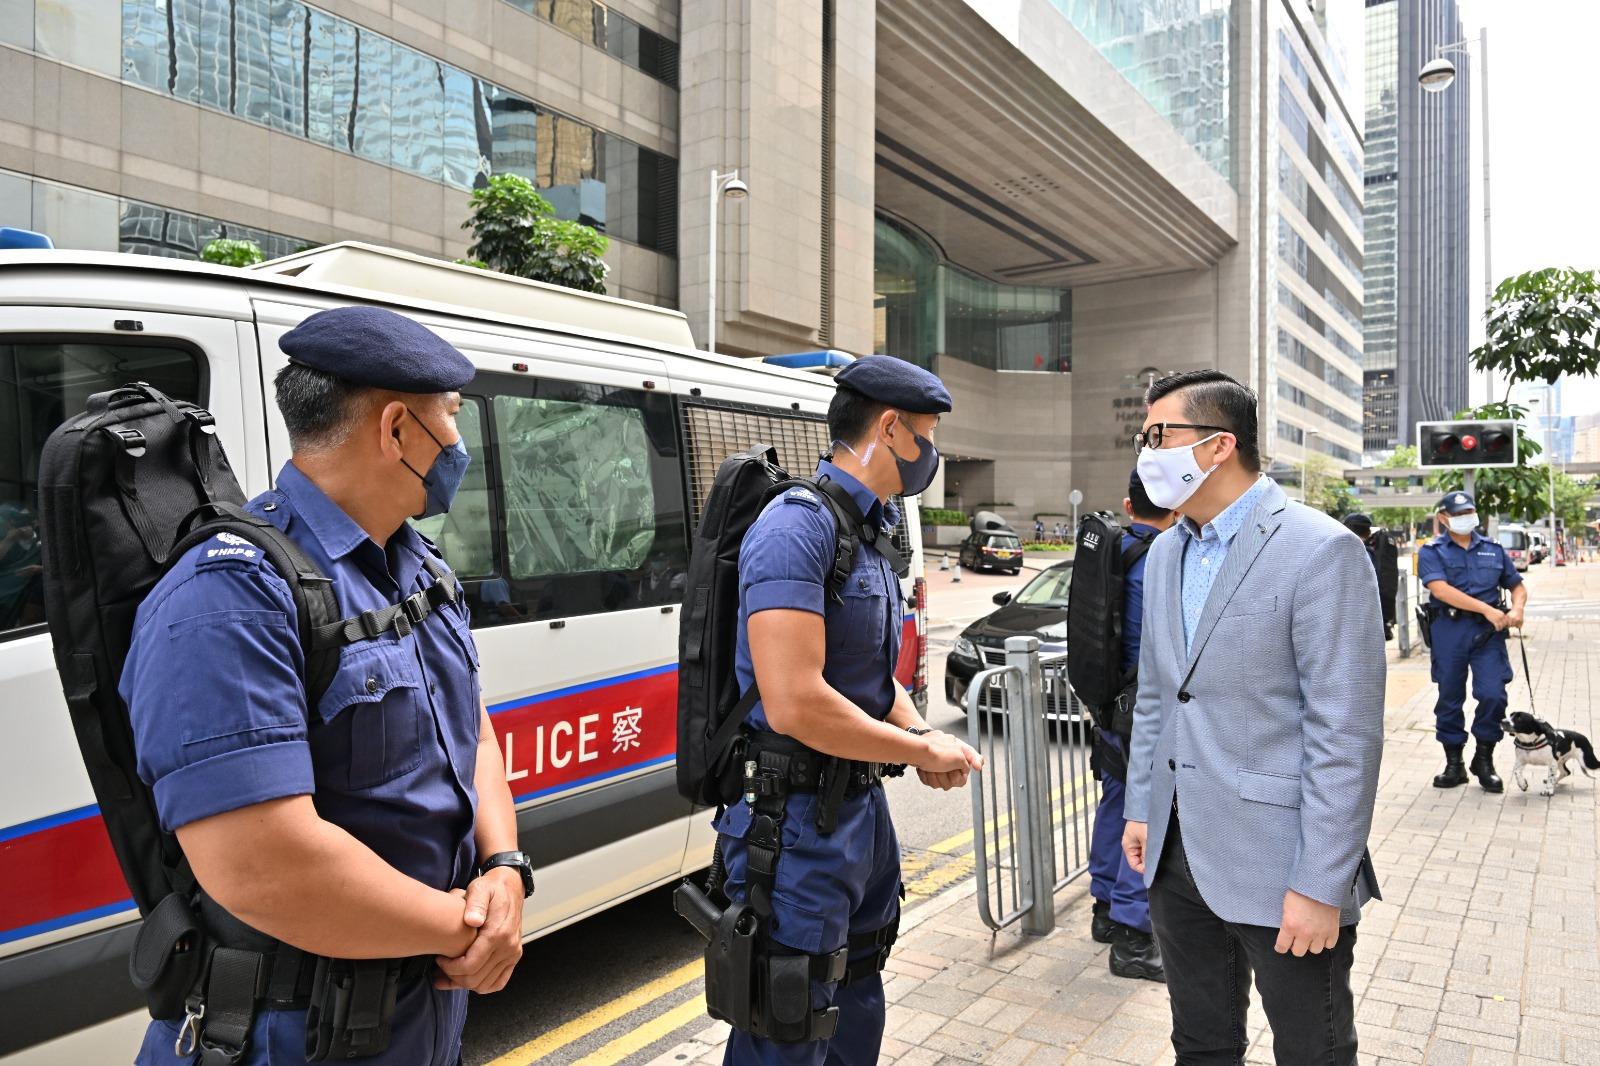 The Secretary for Security, Mr Tang Ping-keung, this morning (May 8) inspected the security arrangements in the vicinity of the Hong Kong Convention and Exhibition Centre to ensure the 2022 Chief Executive Election be conducted in a safe and orderly manner. Photo shows Mr Tang (second right) meeting the personnel of the Airport Security Unit of the Police on duty nearby and giving them words of encouragement.